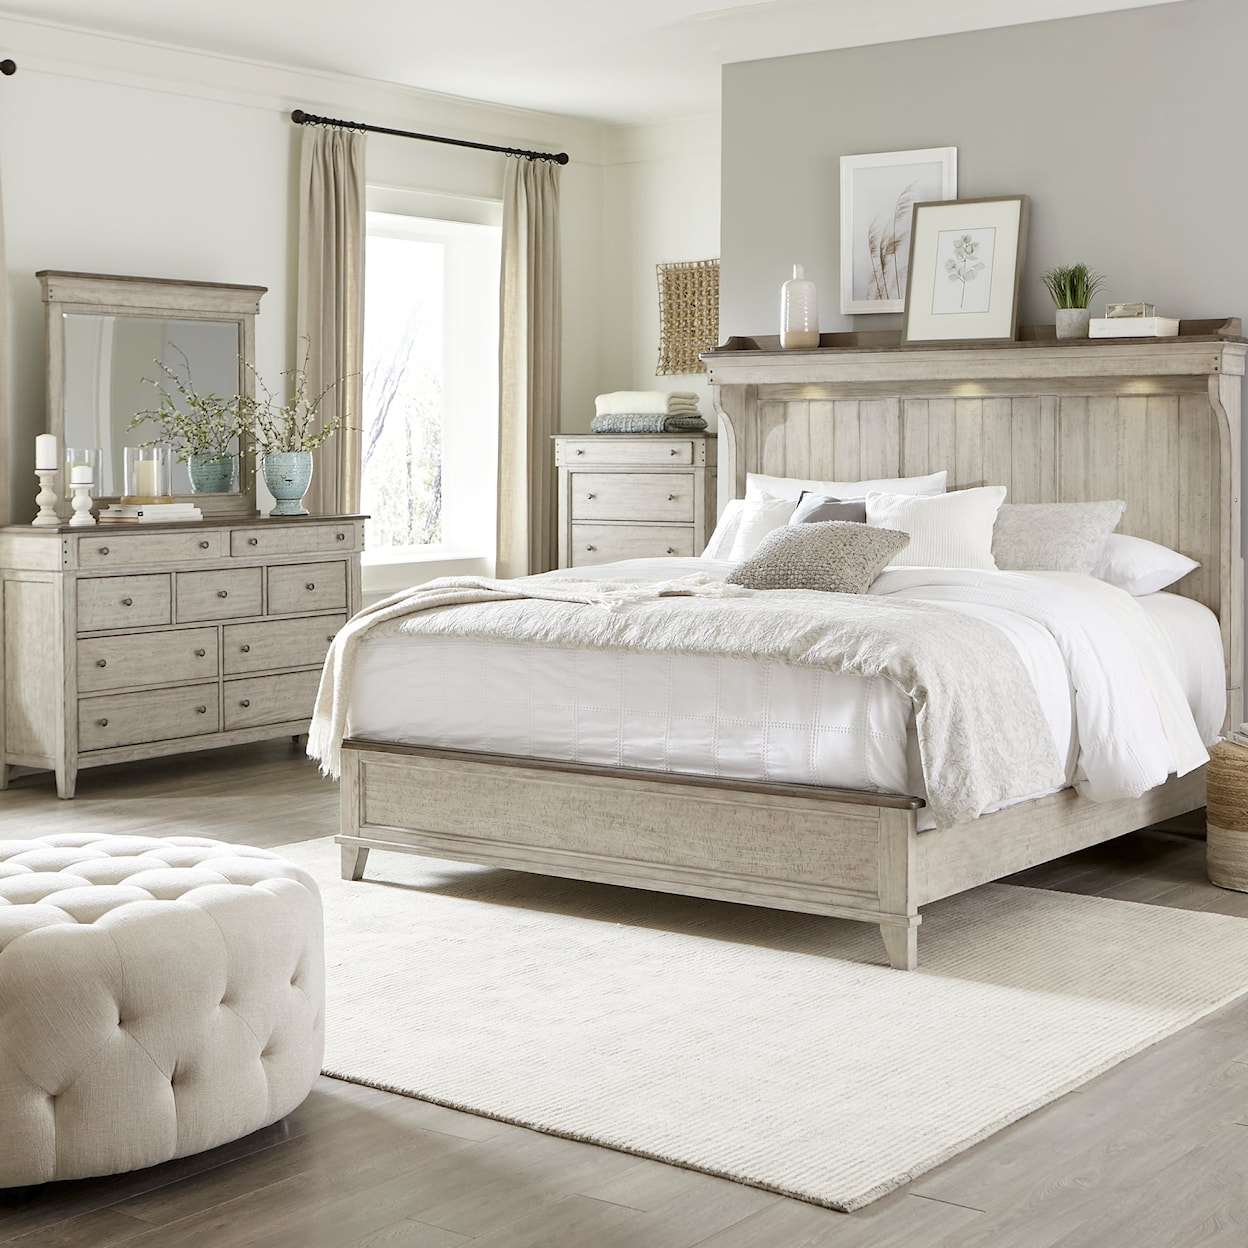 Libby Ivy Hollow 4-Piece King Mantle Bedroom Set